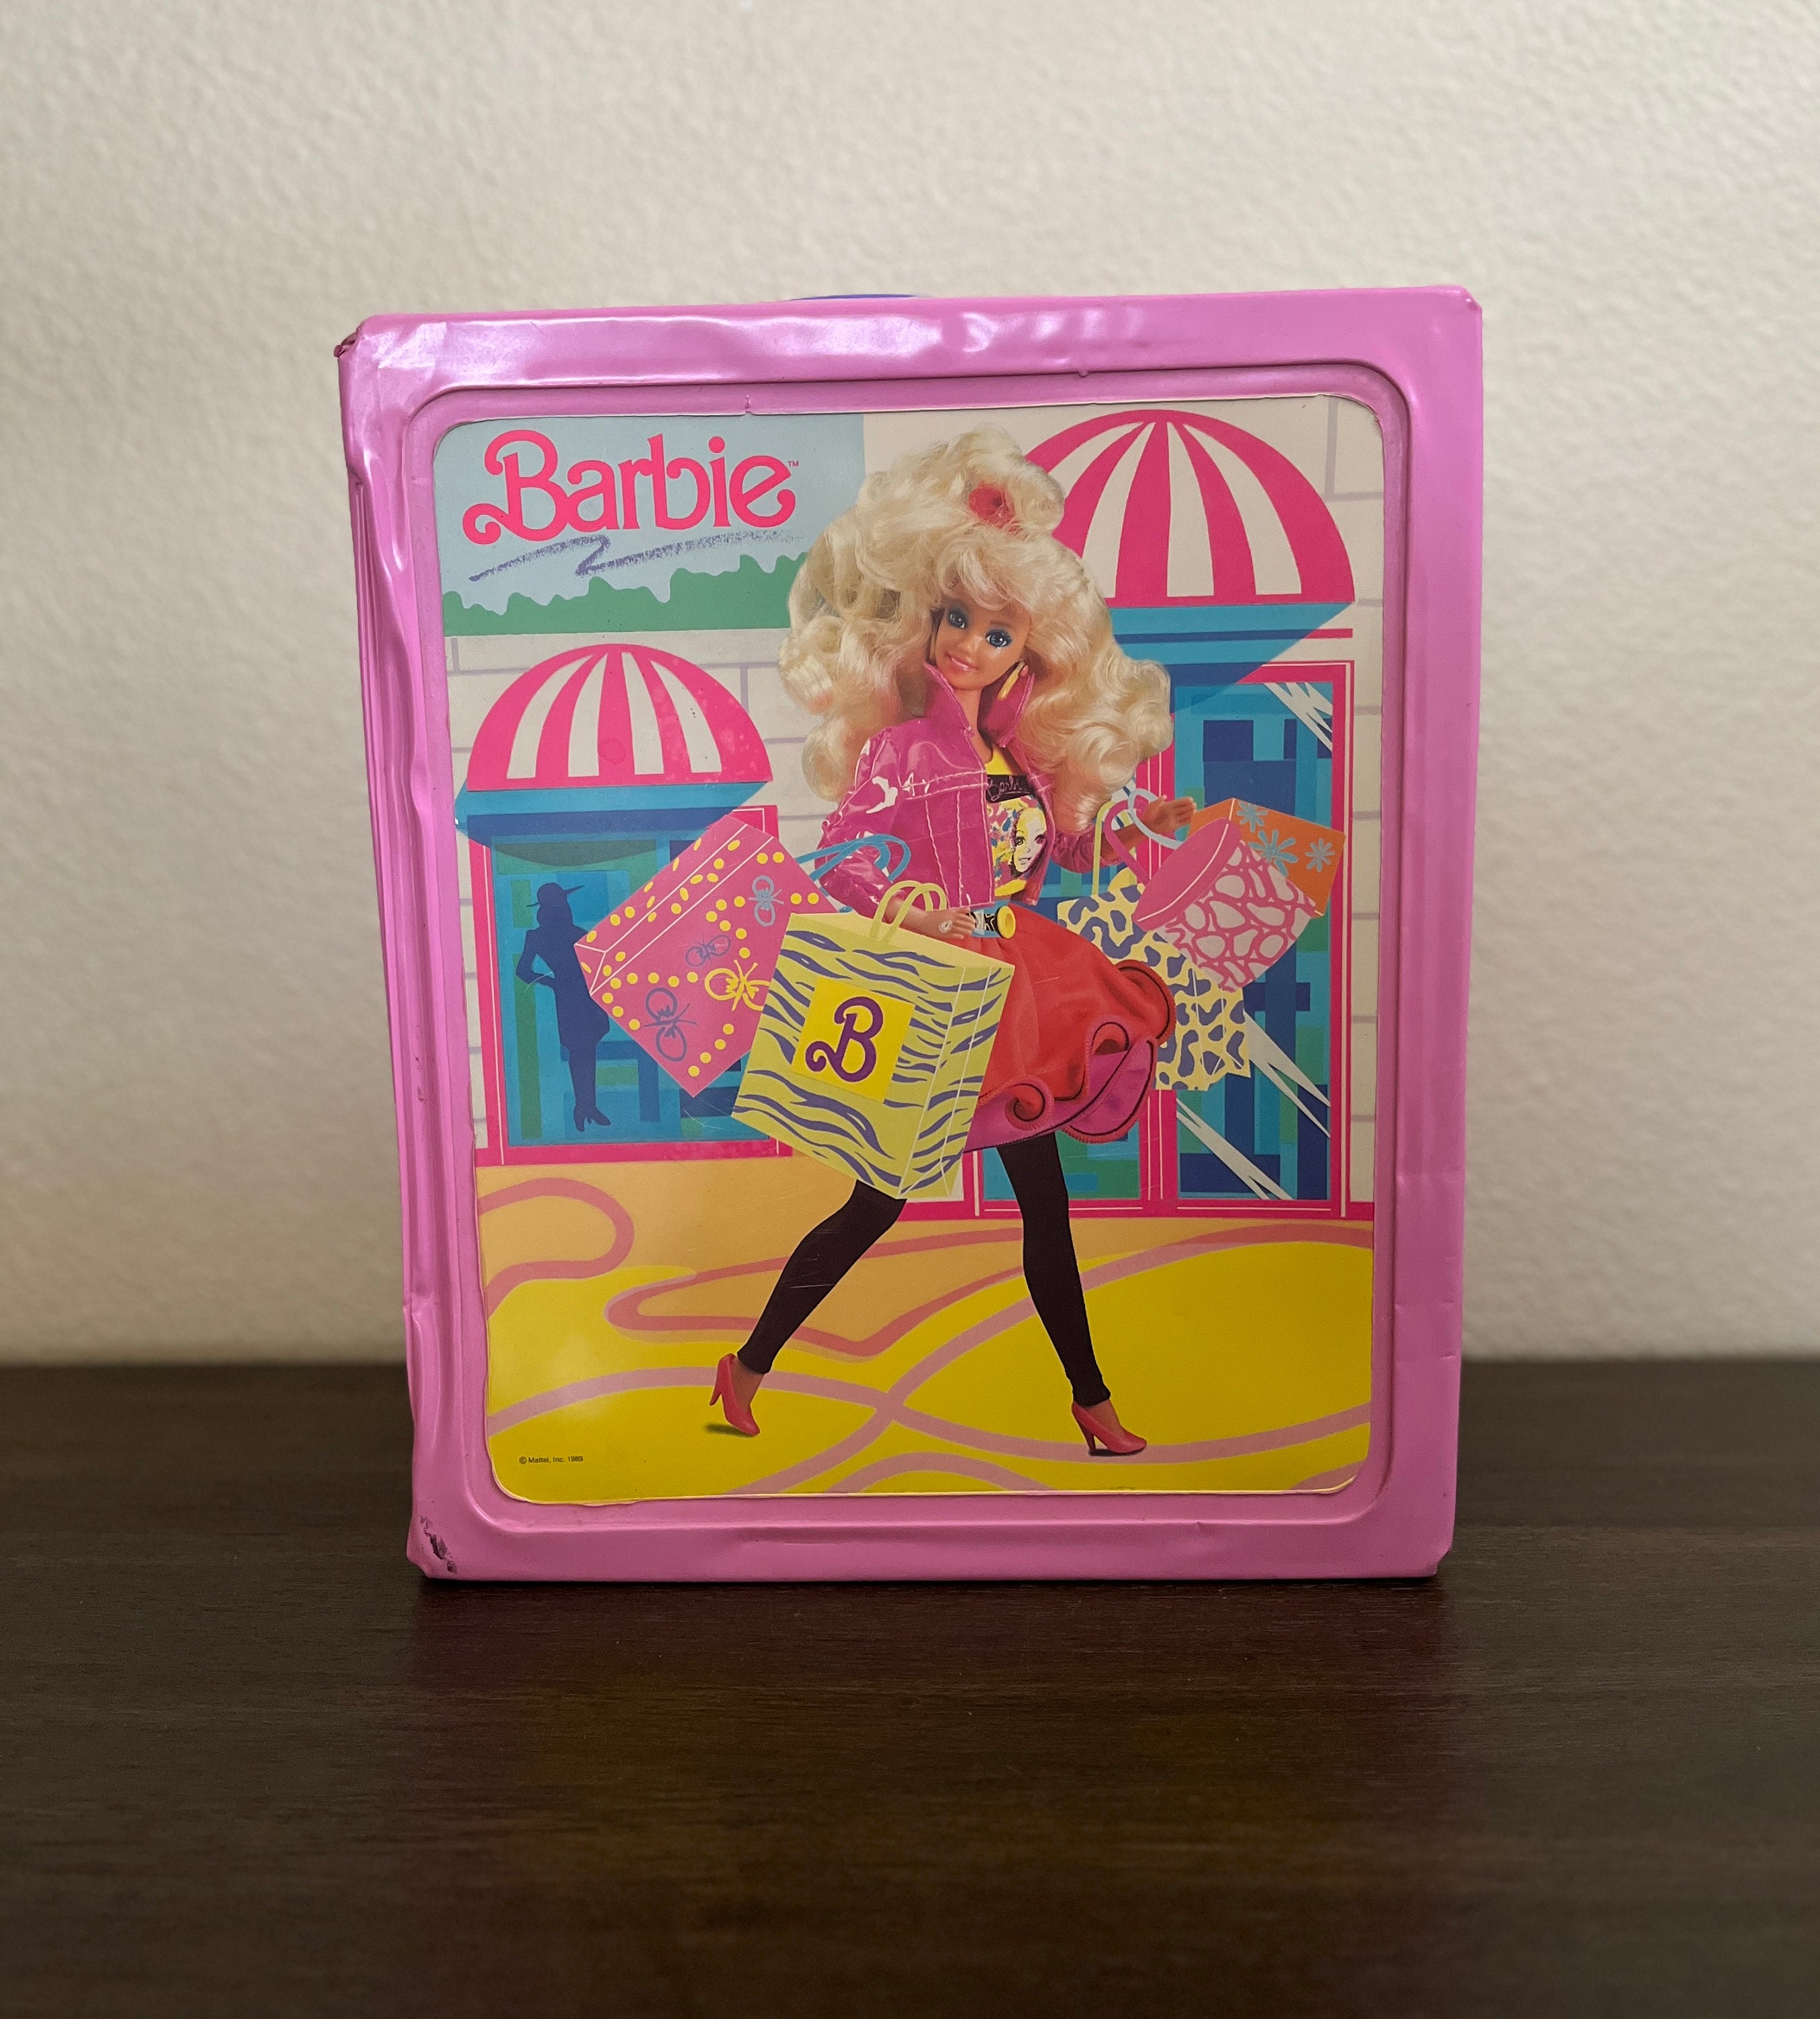 1989 Barbie Pink Carrying Case